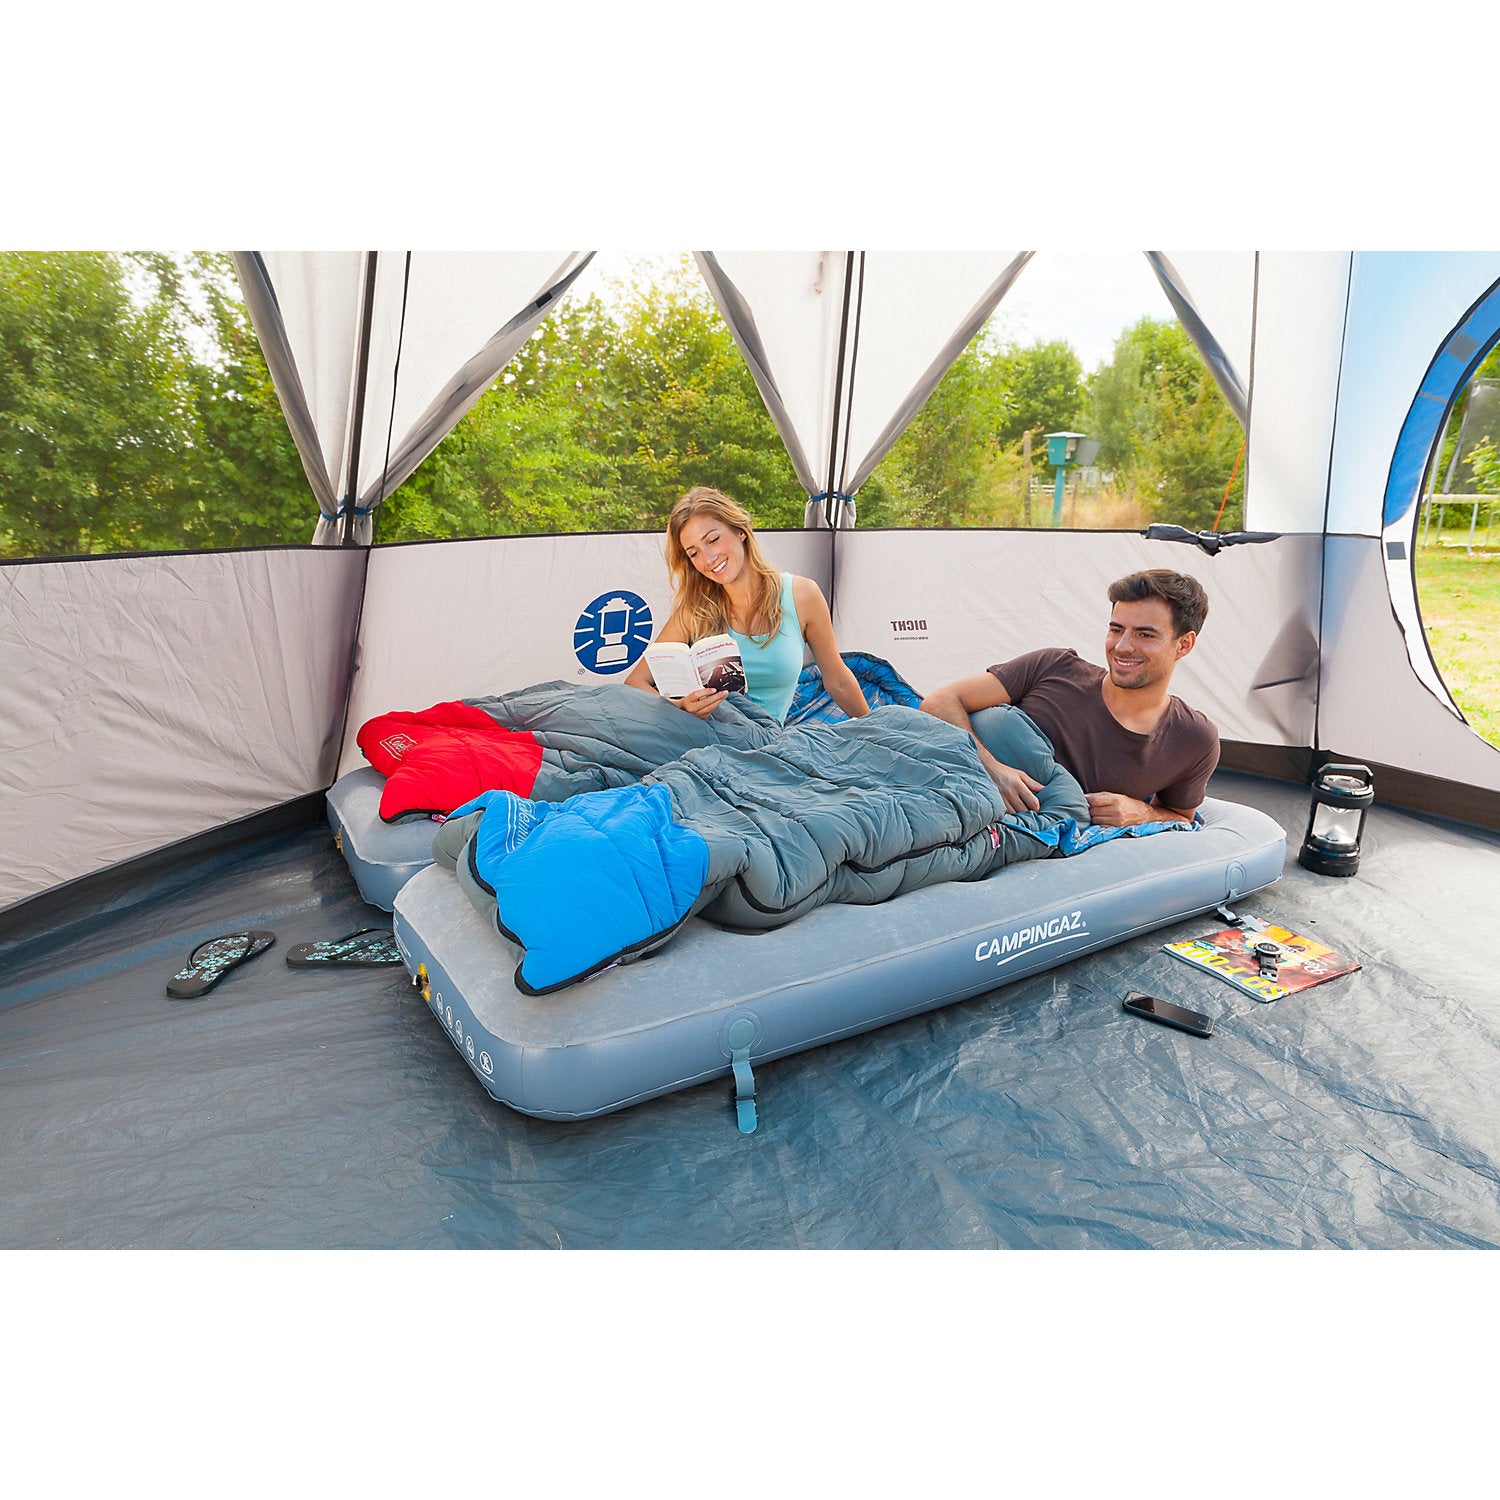 Campingaz Convertible Quickbed Airbed